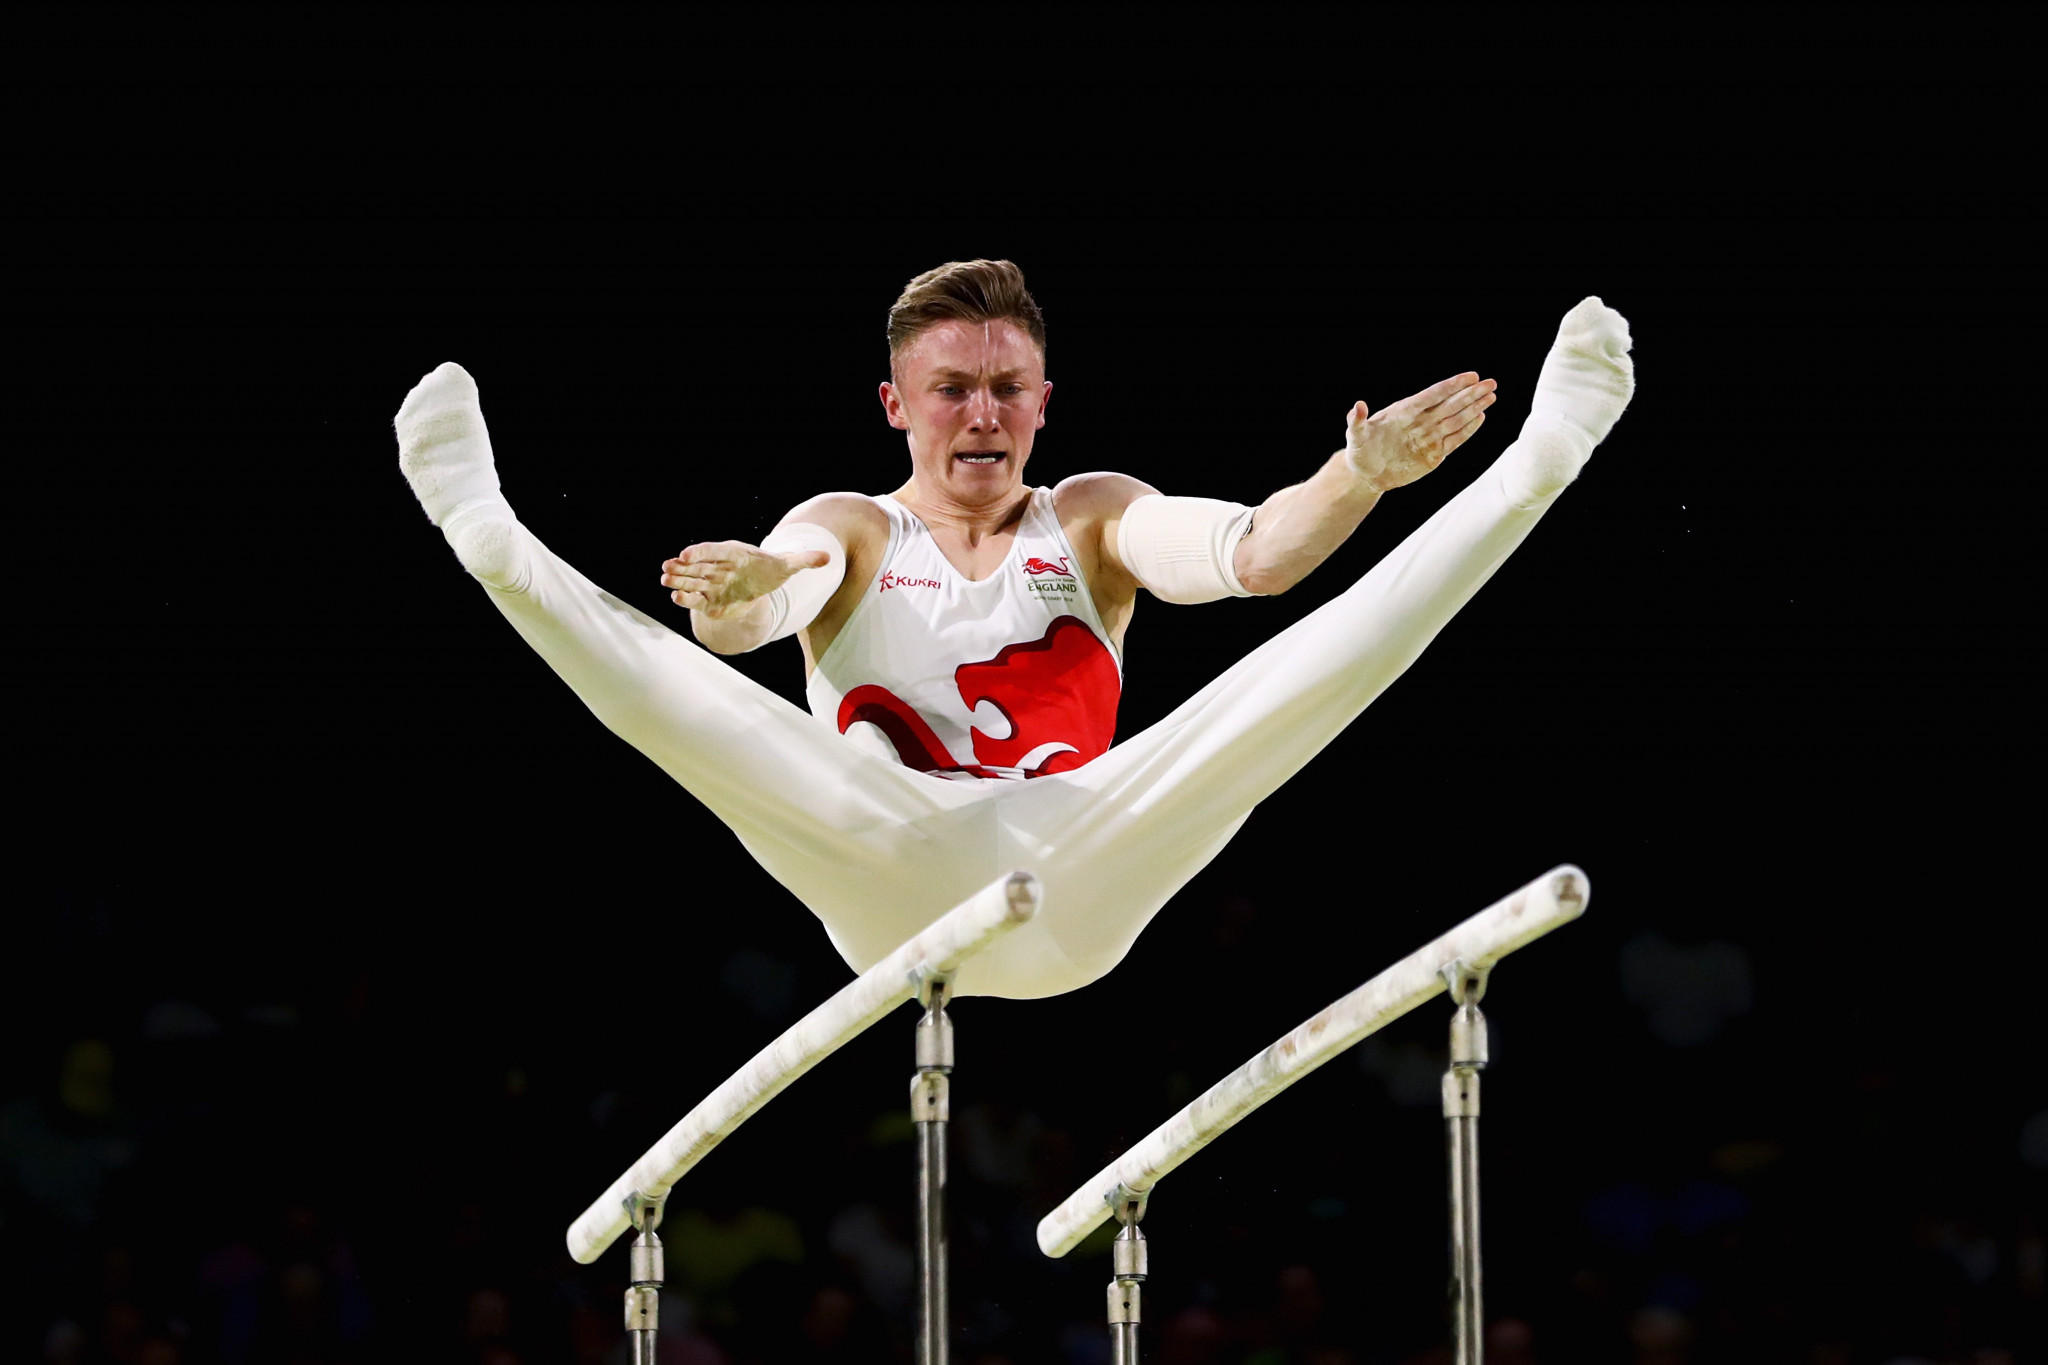 England's Nile Wilson claimed a third artistic gymnastics title by winning the men's horizontal bar event ©Getty Images